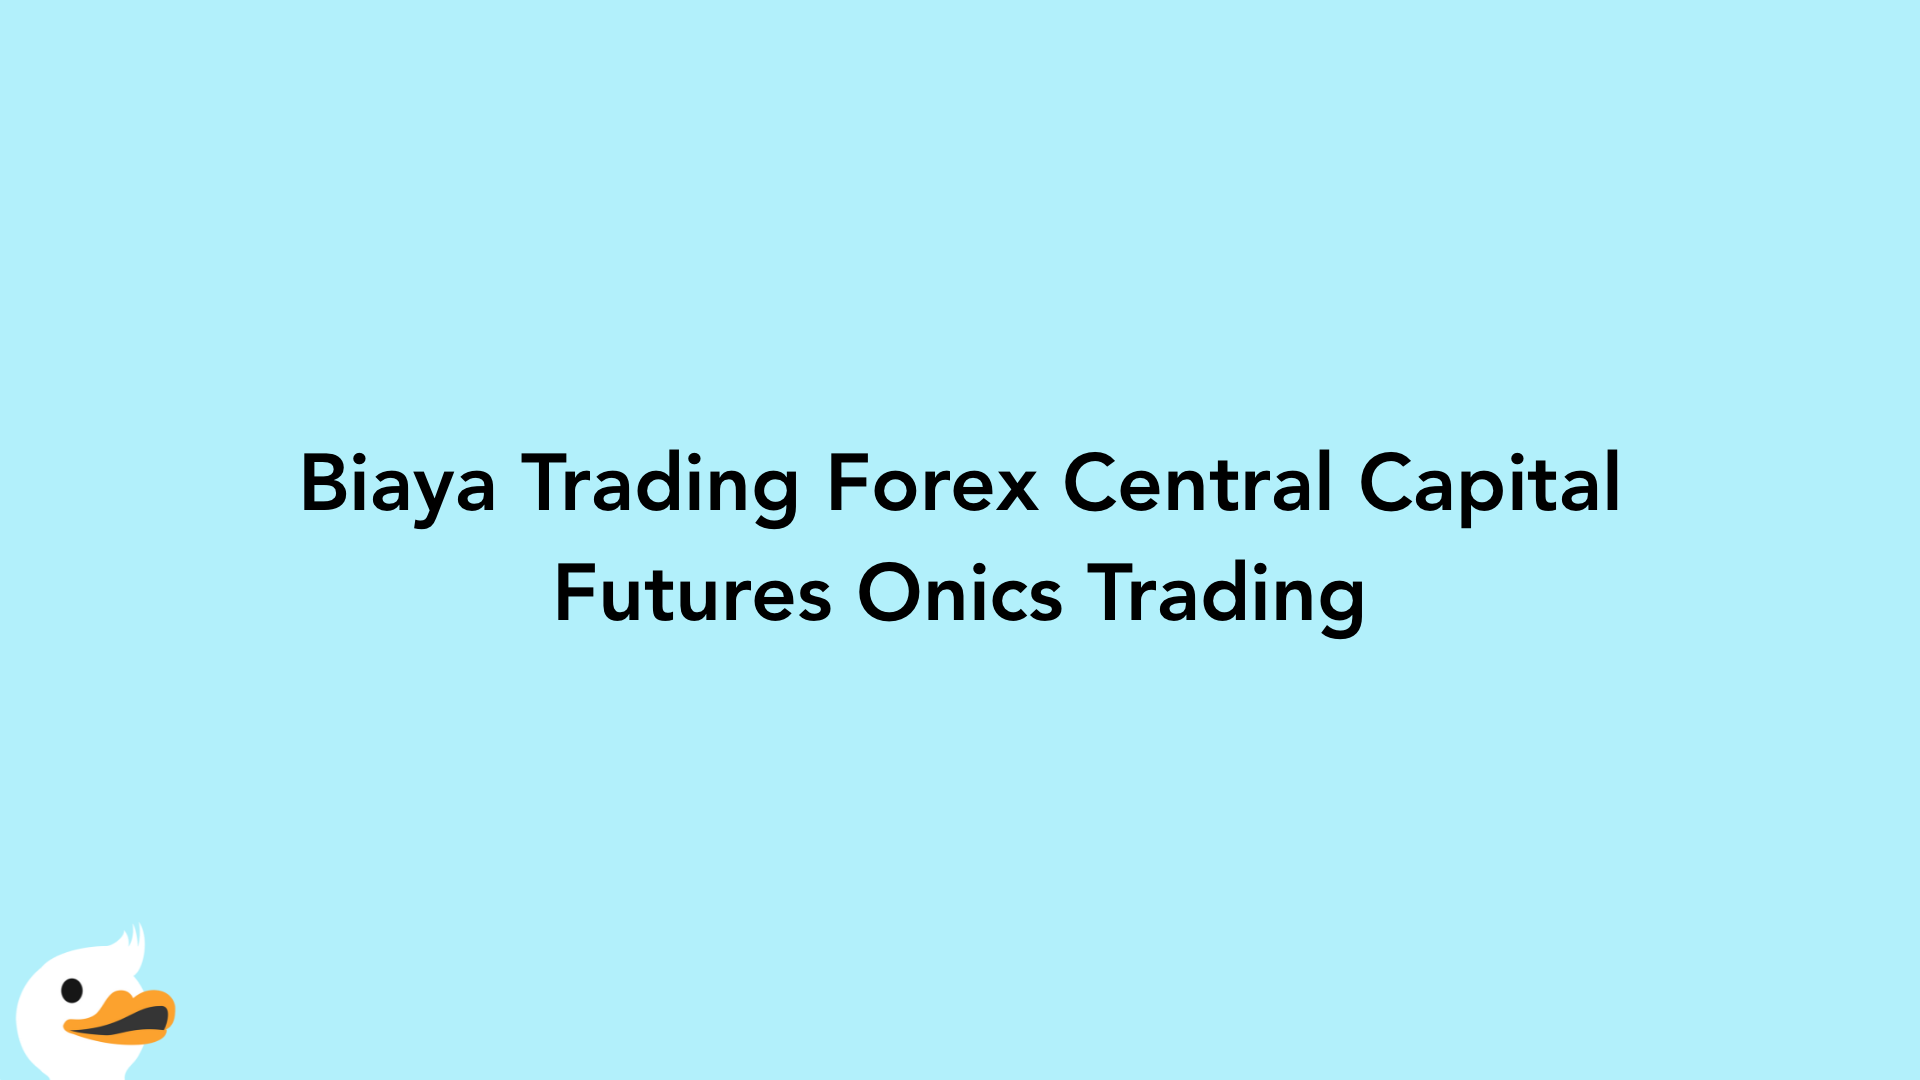 Biaya Trading Forex Central Capital Futures Onics Trading